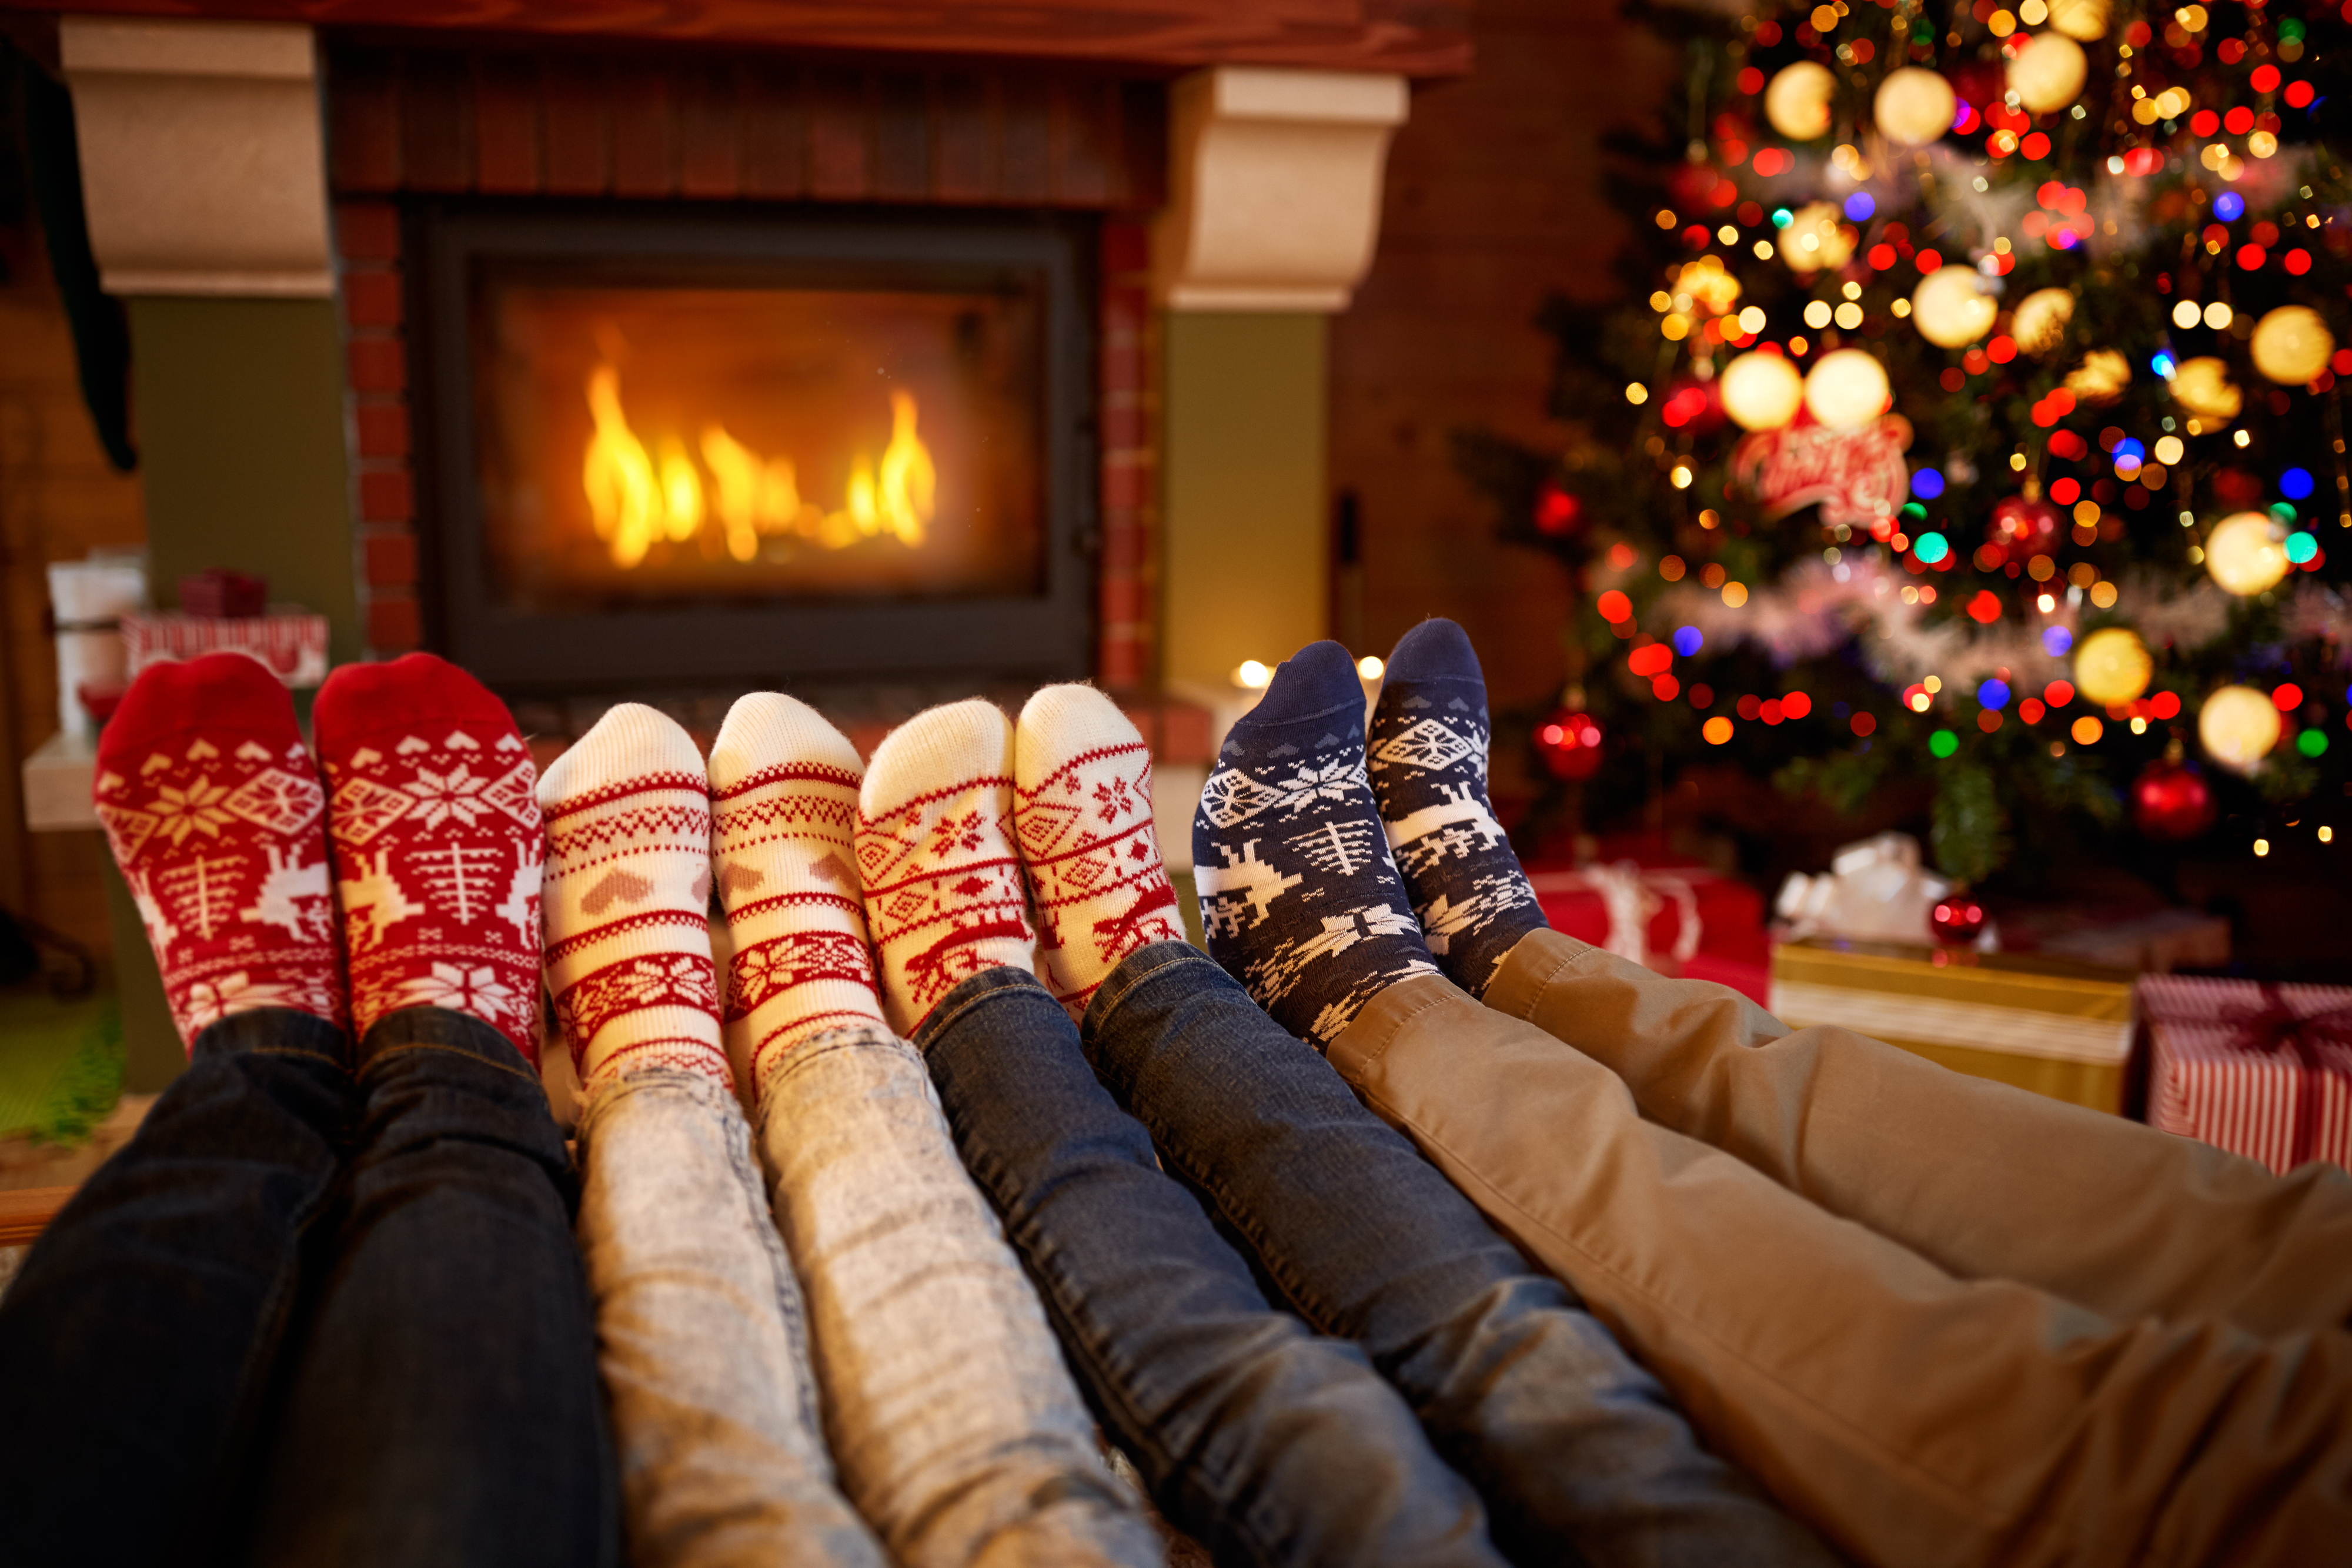 A variety of Christmas socks by a fireplace and decorated Christmas tree